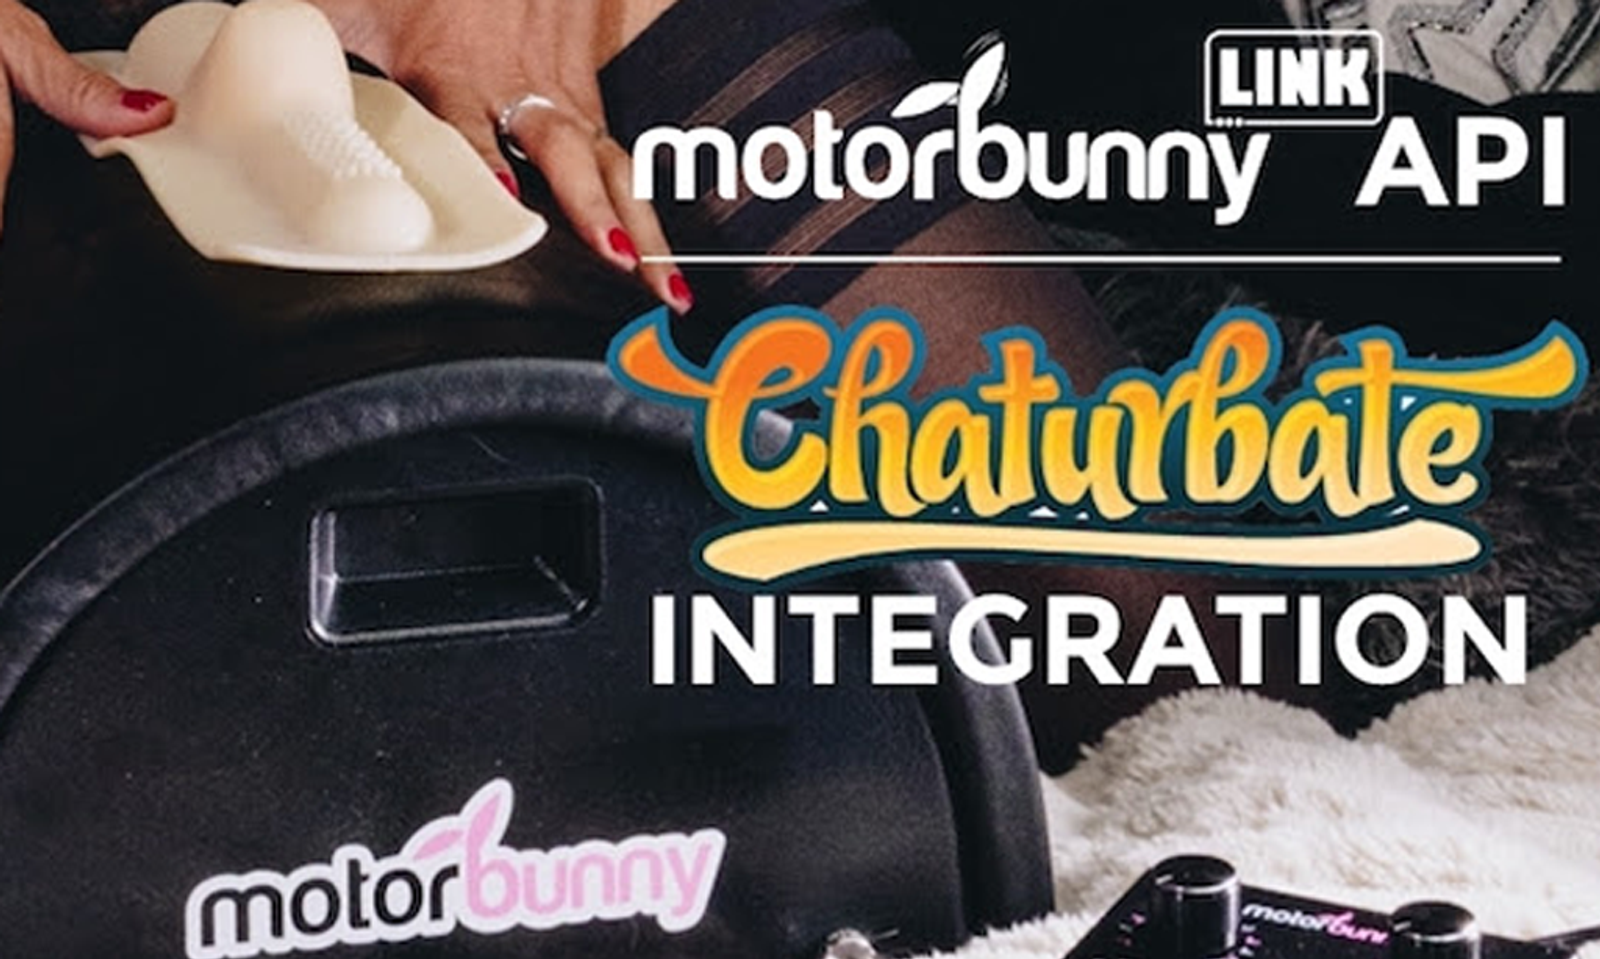 Motorbunny Introduces Integration With Chaturbate via LINK API